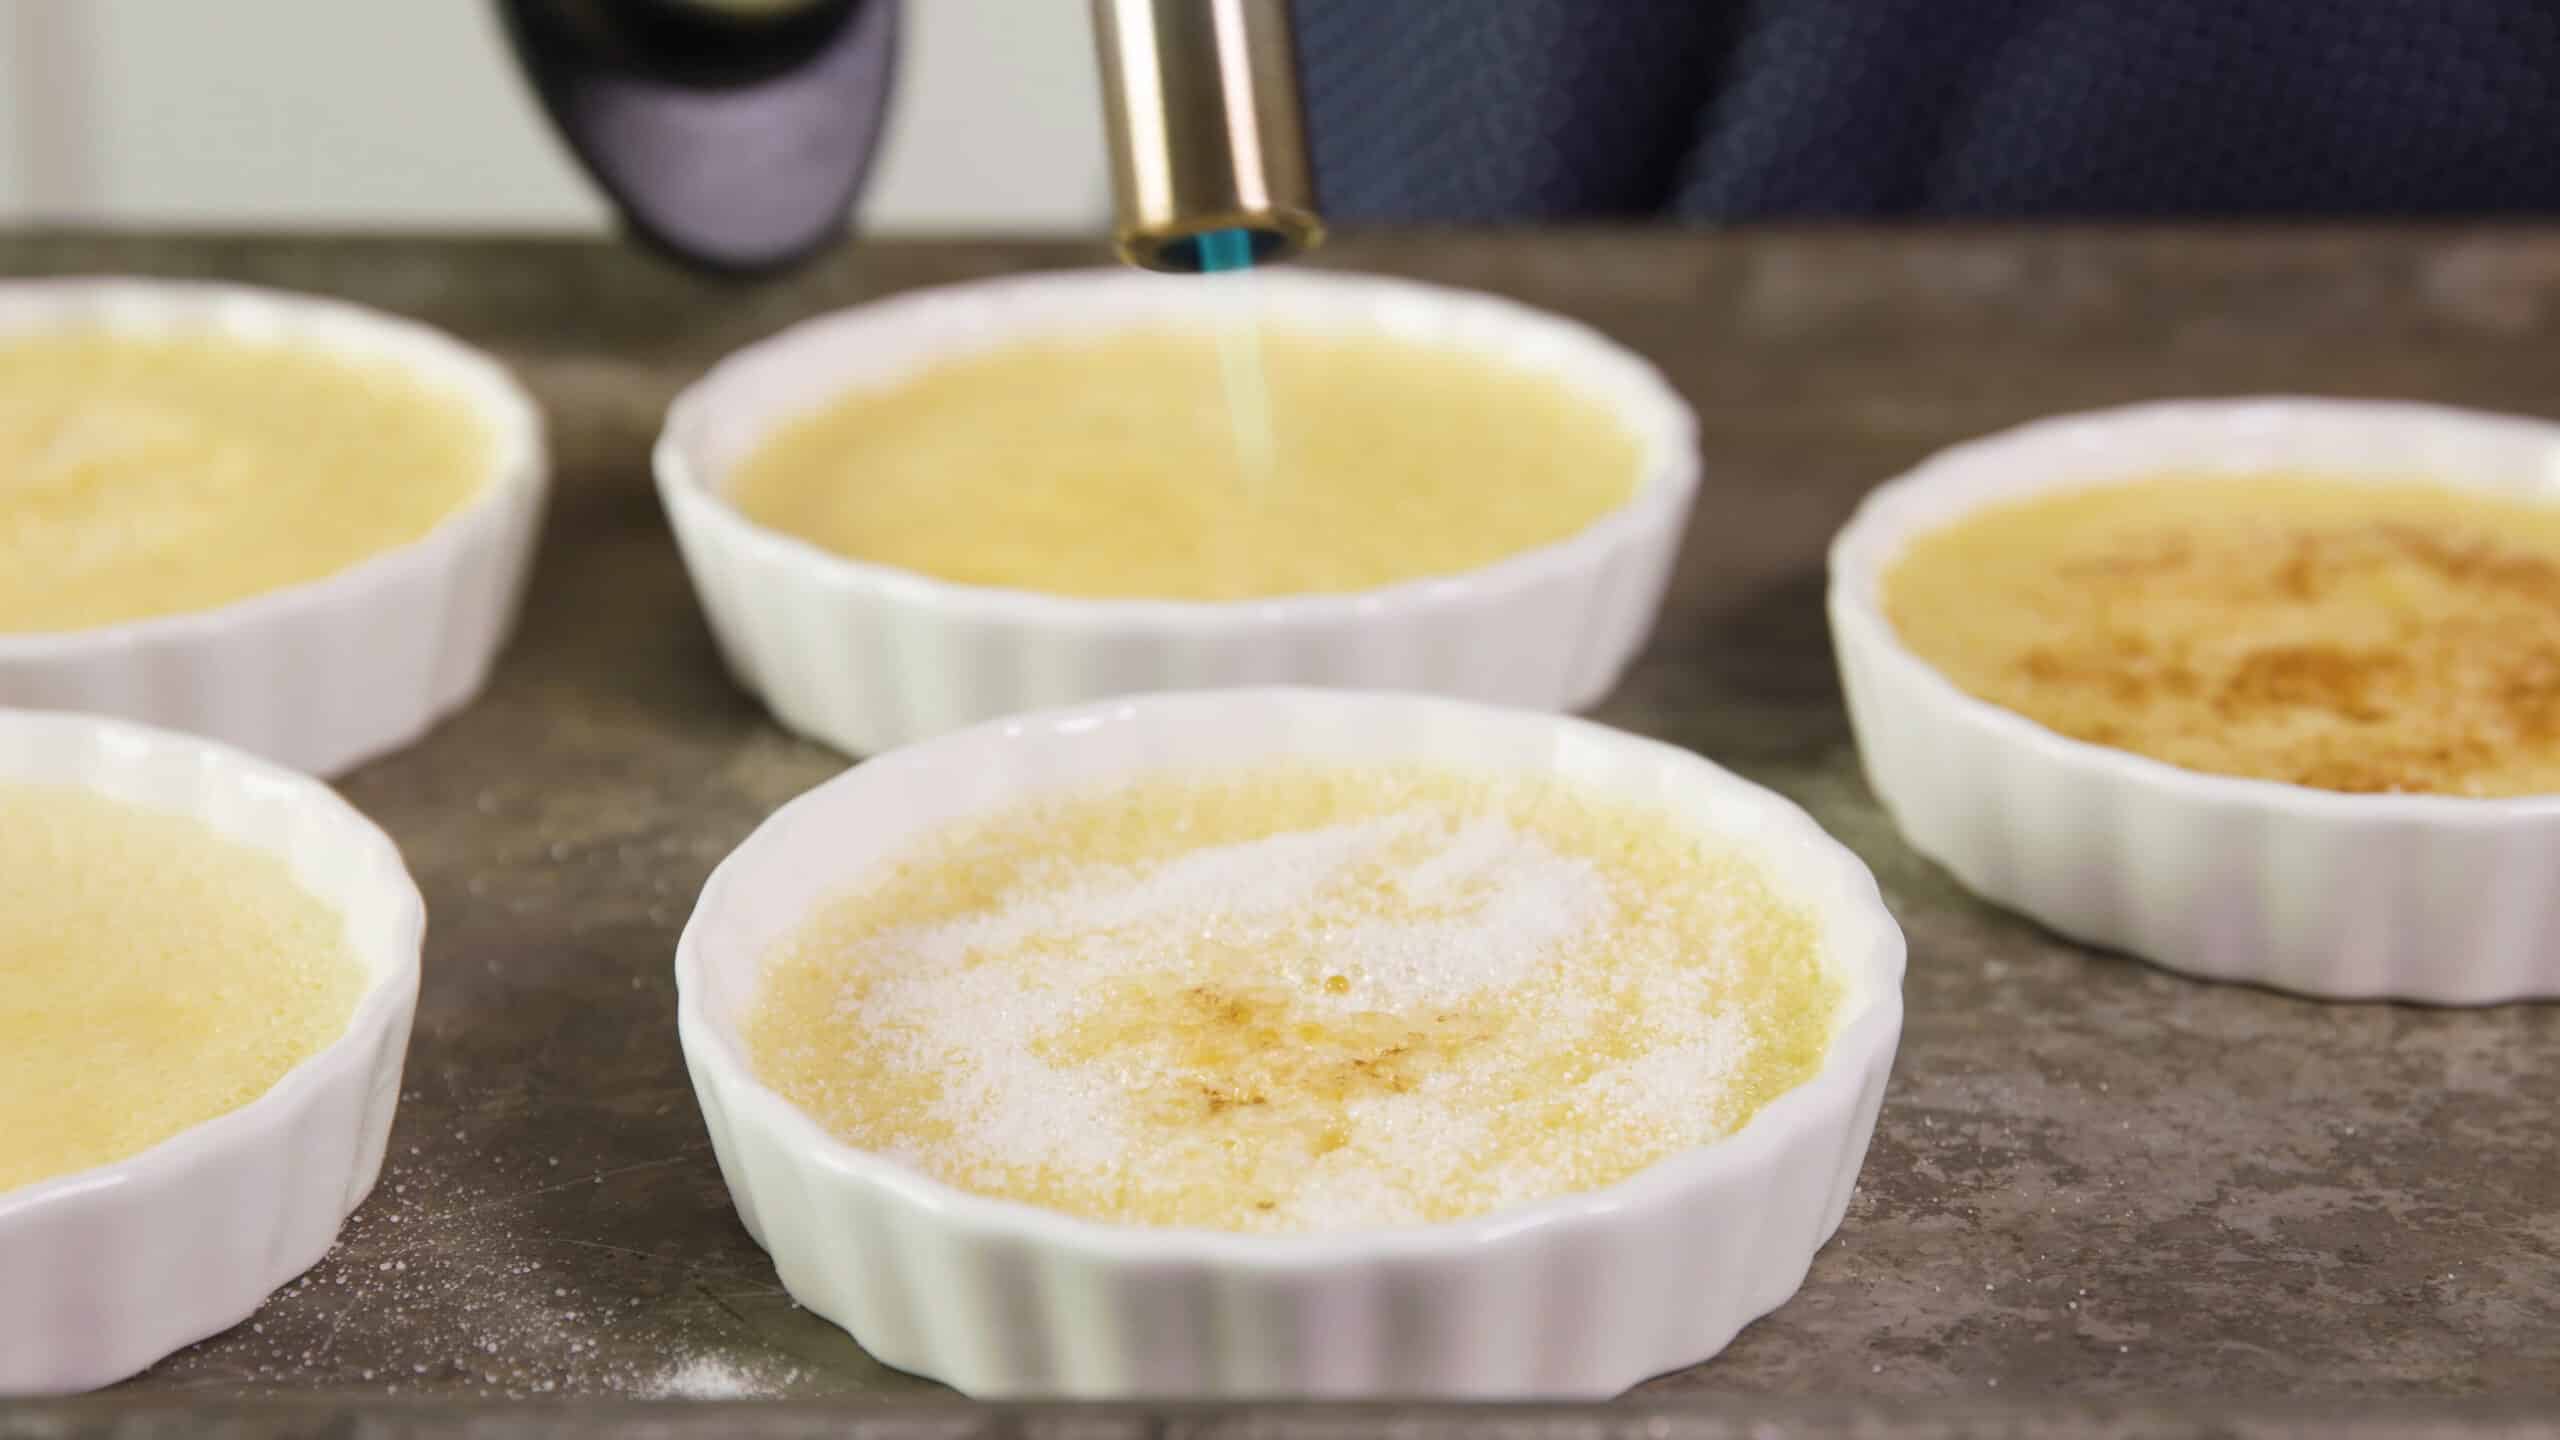 Angled view of metal baking sheet with white glass ramekins filled with chilled egg mixture and being topped with sugar the top being cooked/toasted with a creme brûlée torch.